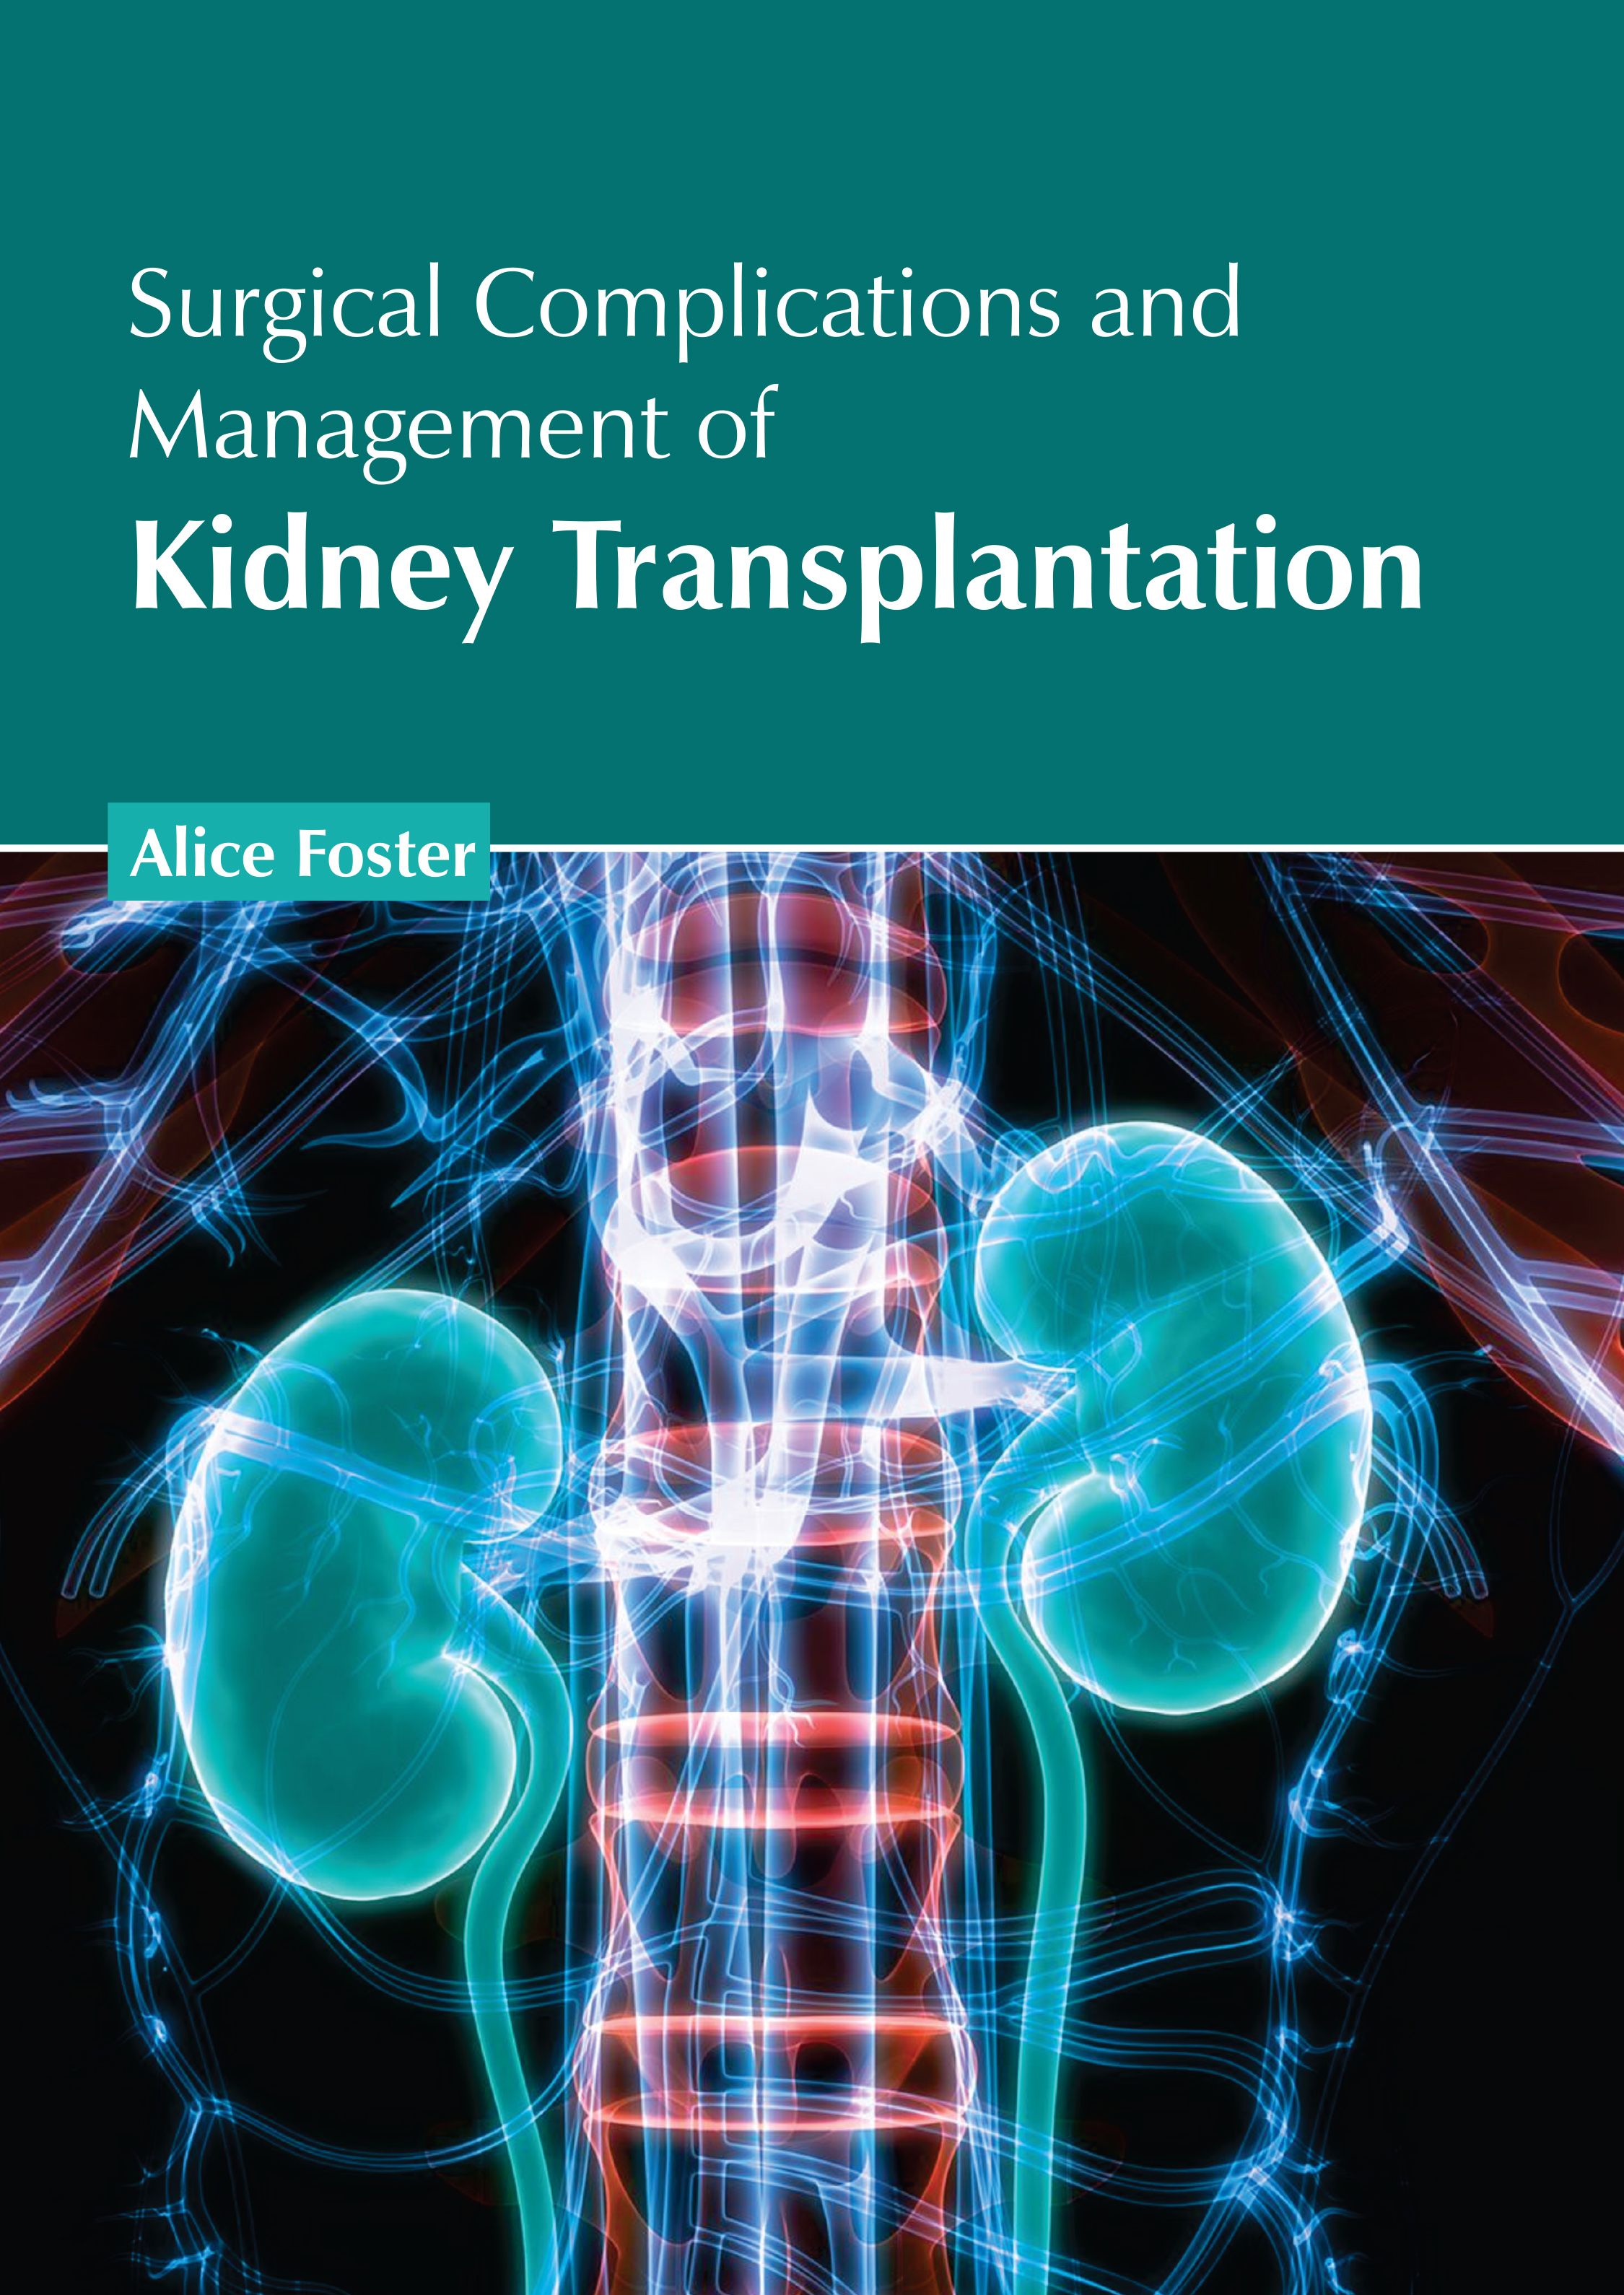 

exclusive-publishers/american-medical-publishers/surgical-complications-and-management-of-kidney-transplantation-9798887402277